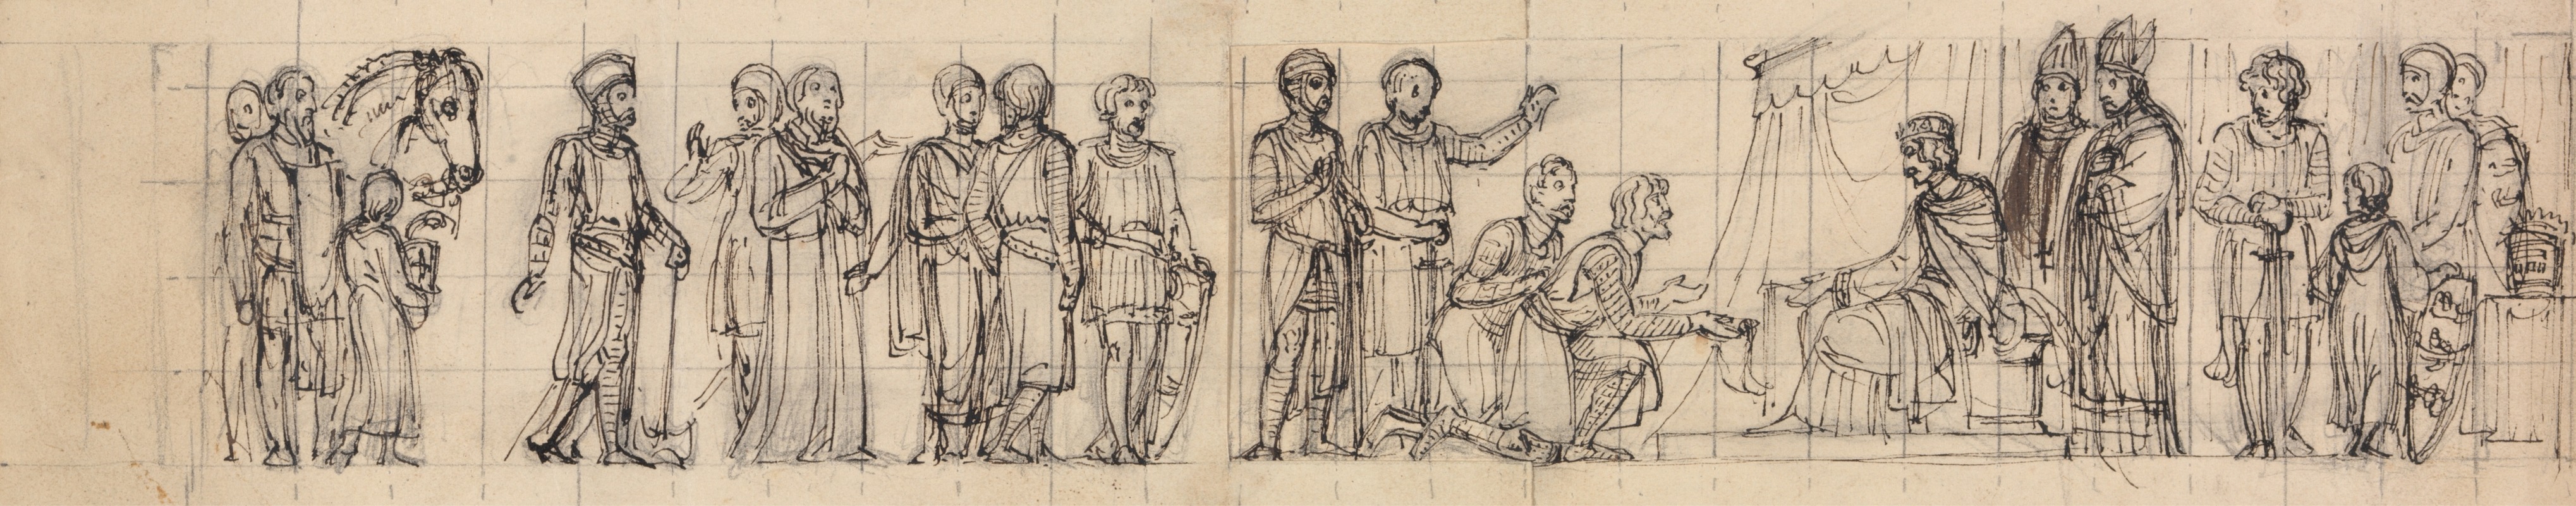 Robert Smirke - Study of Knights, Paying Homage, to the King